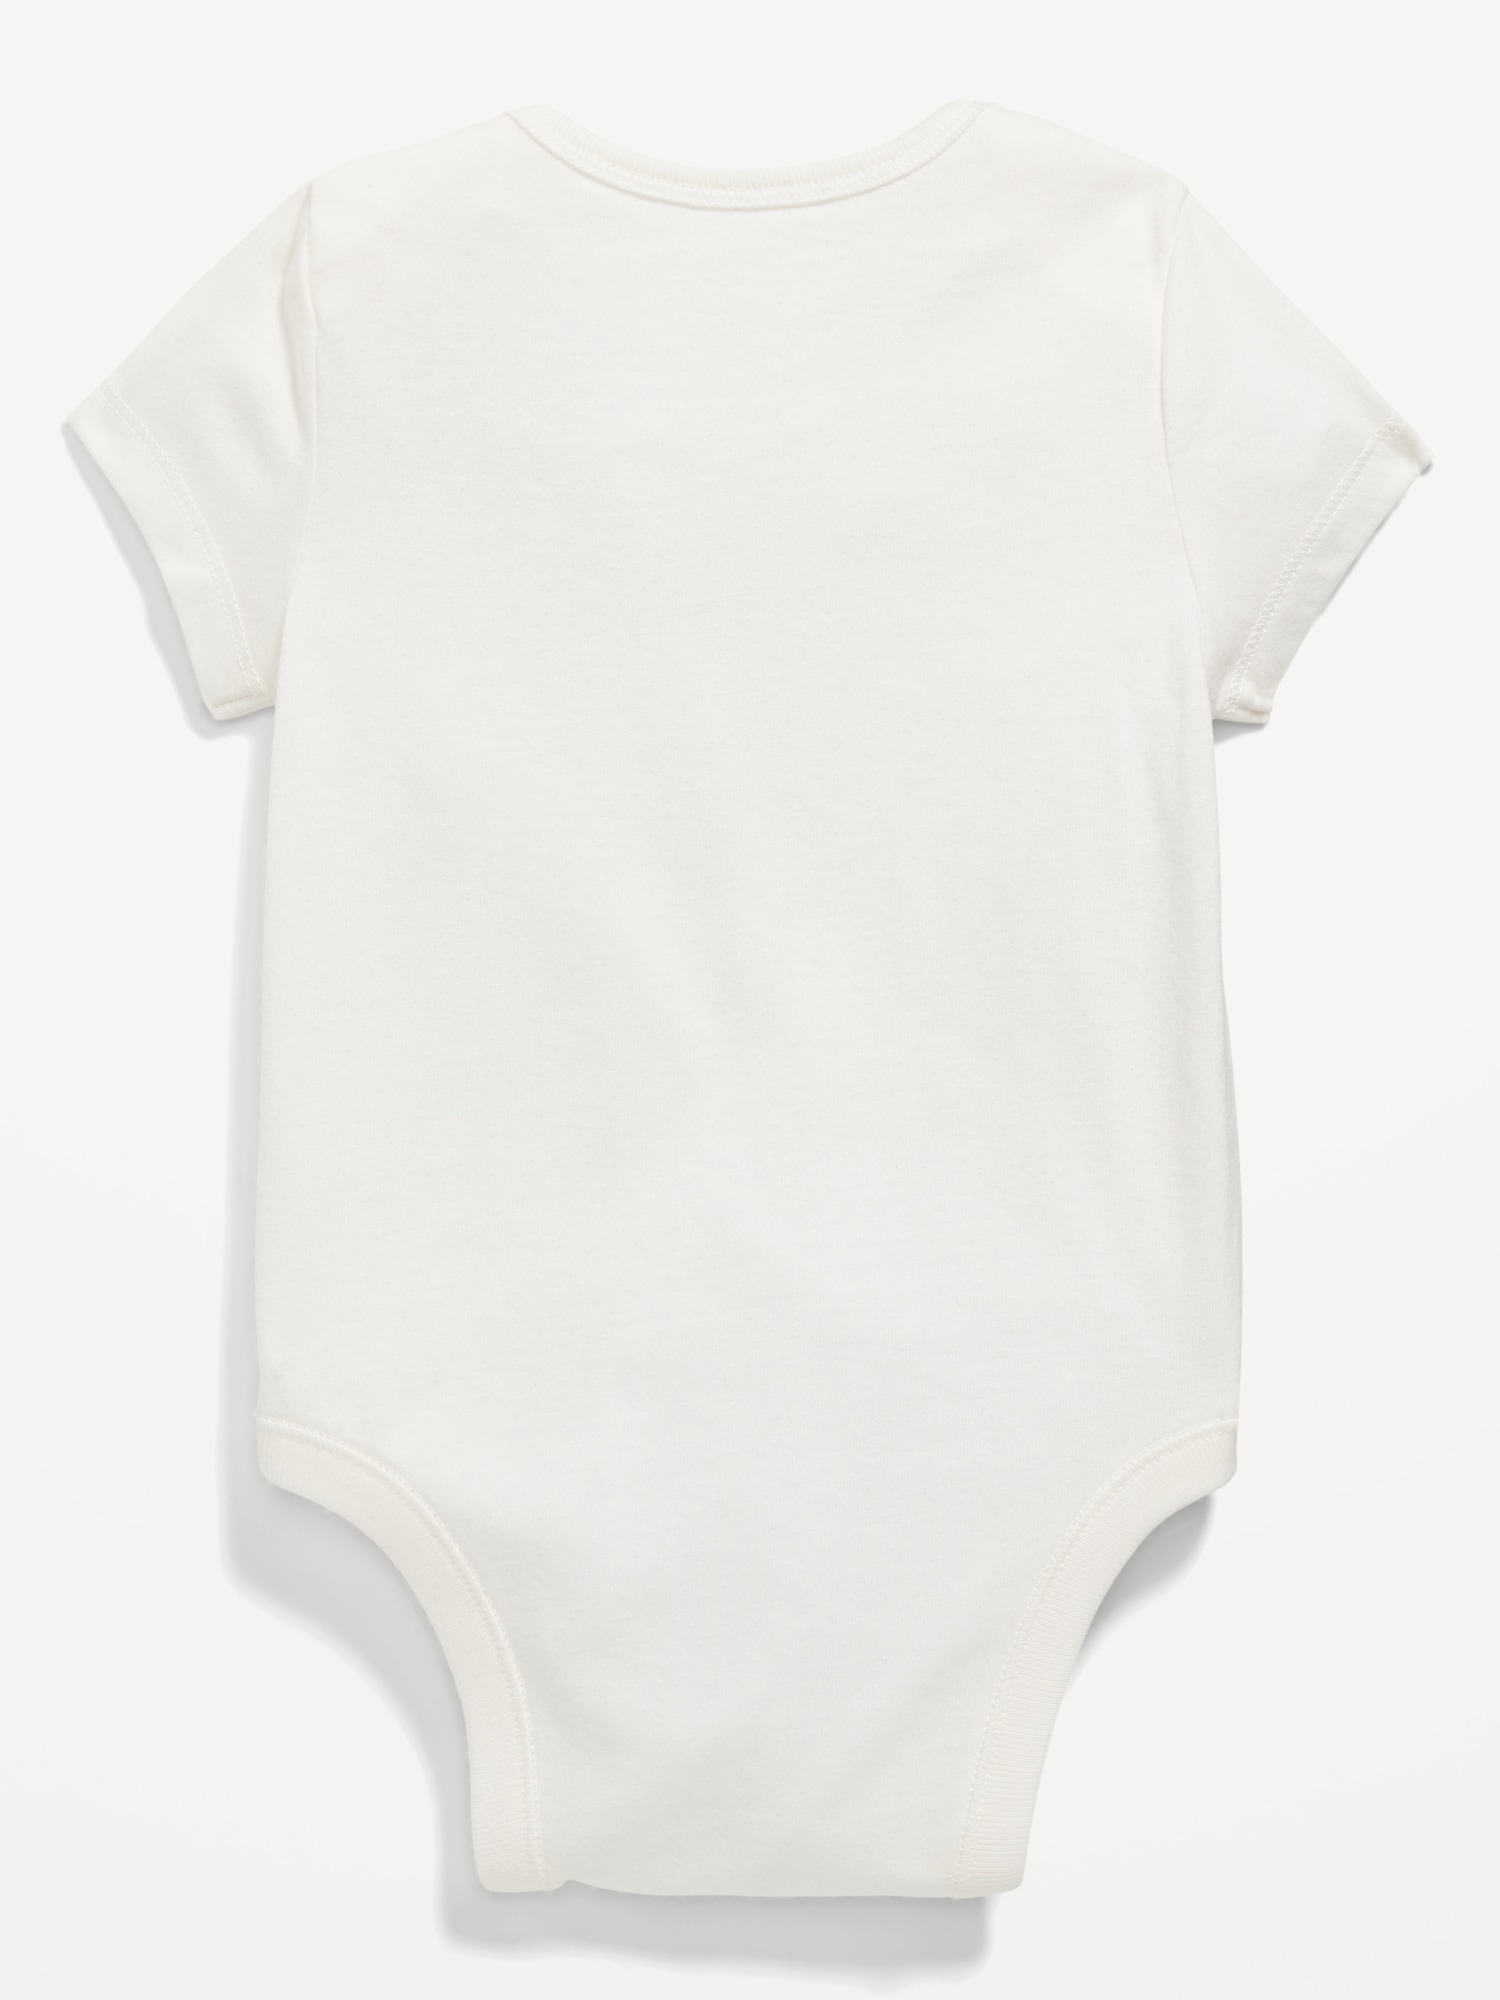 Matching Unisex Short-Sleeve Graphic Bodysuit for Baby | Old Navy